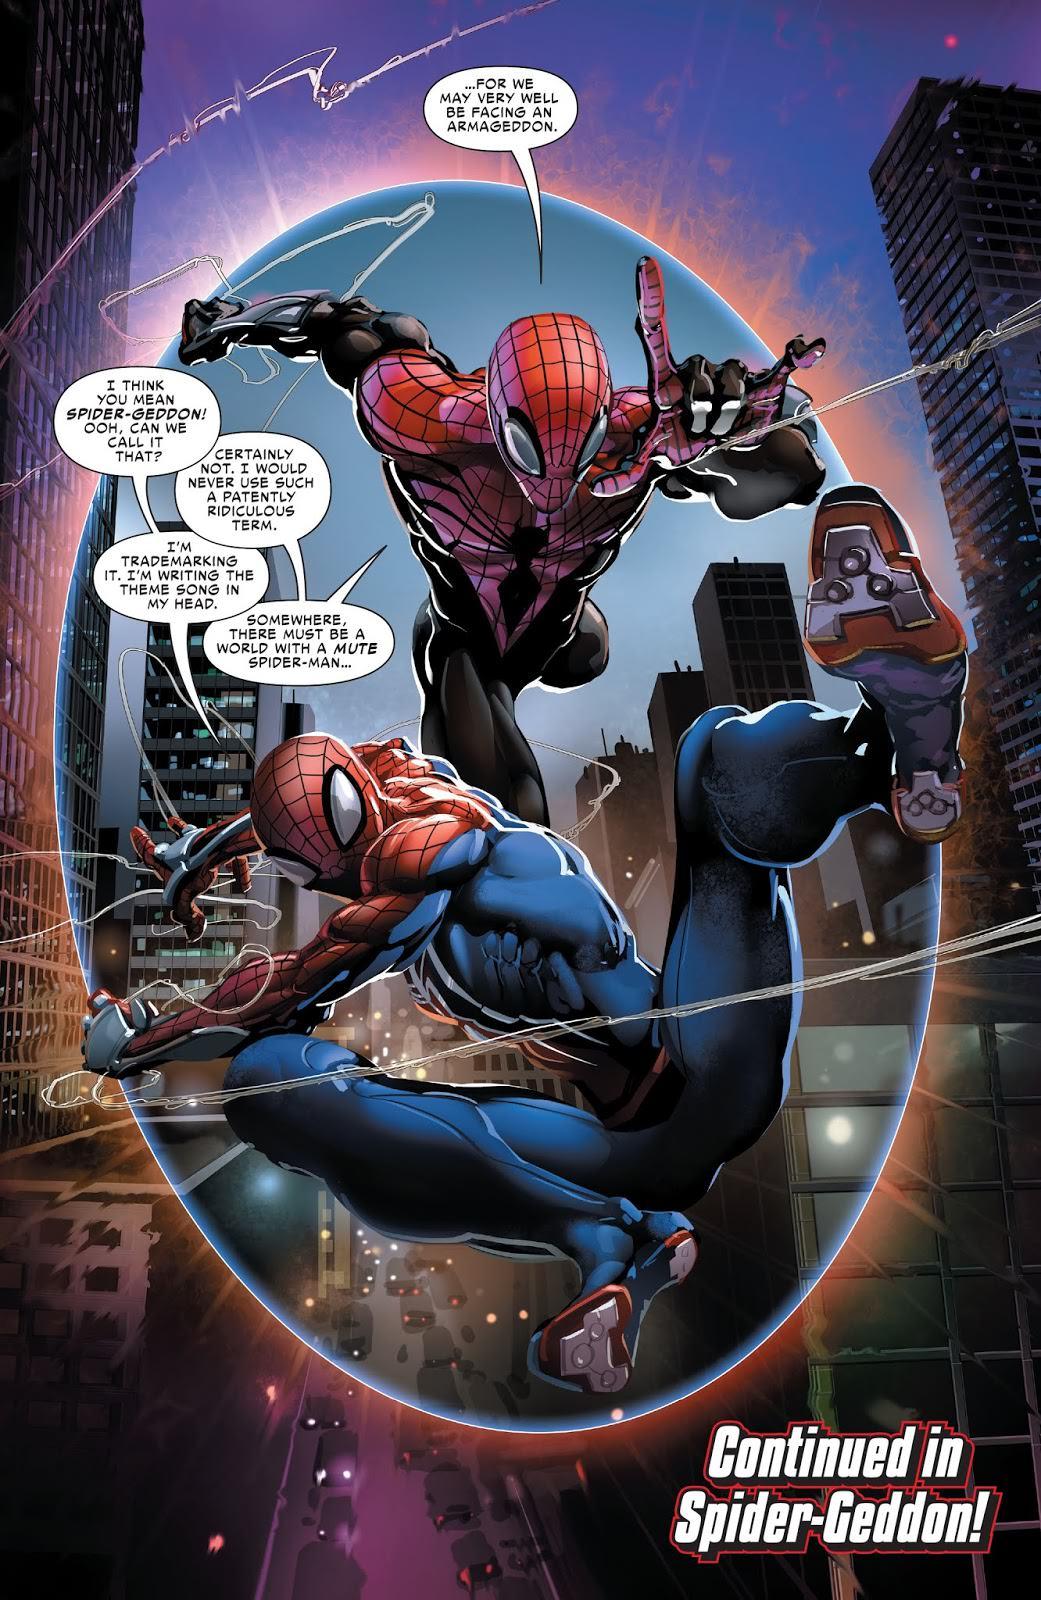 Spoiler For Spider Geddon If Anyone Is Eager For More Adventures